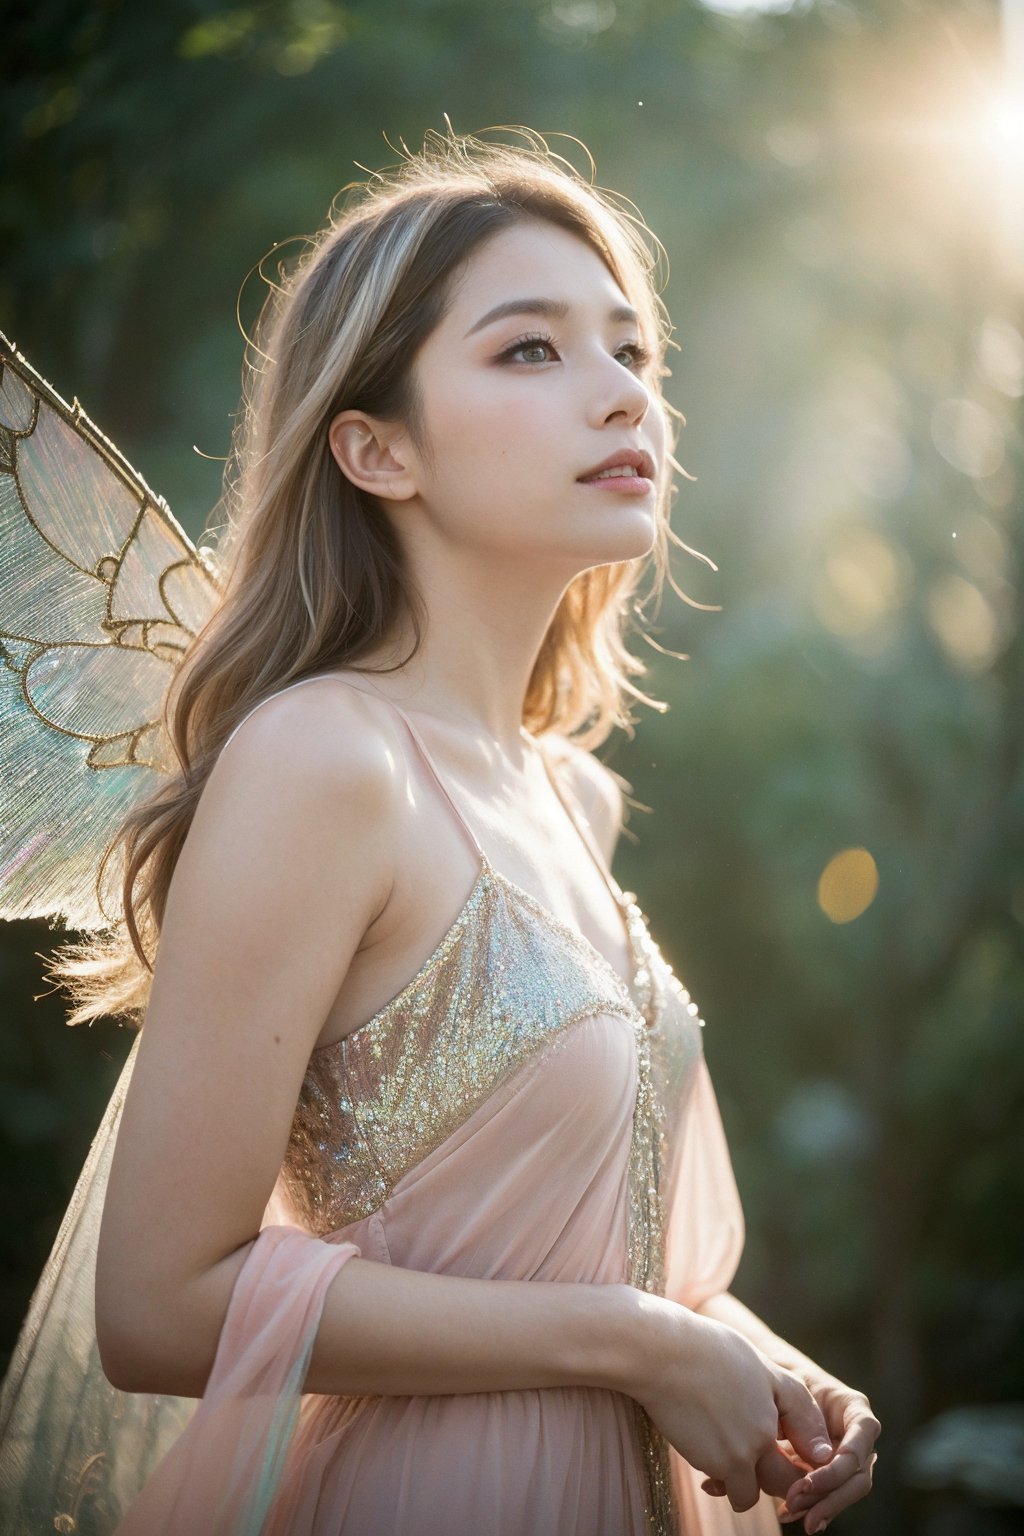 (masterpiece, best quality, CGI, official art:1.2), (stunning celestial being:1.3), (iridescent wings:1.4), shimmering silver hair, piercing sapphire eyes, gentle smile, (luminous aura:1.2), soft focus, whimsical atmosphere, serene emotion, dreamy tone, vibrant intensity, inspired by Hayao Miyazaki's style, ethereal aesthetic, pastel colors with (soft pink accents:1.1), warm mood, soft golden lighting, diagonal shot, looking up in wonder, surrounded by (delicate clouds:1.1) and (shimmering stardust:1.2), focal point on the being's face, intricate textures on wings and clothes, highly realistic fabric texture, atmospheric mist effect, high image complexity, detailed environment, subtle movement of wings, dynamic energy